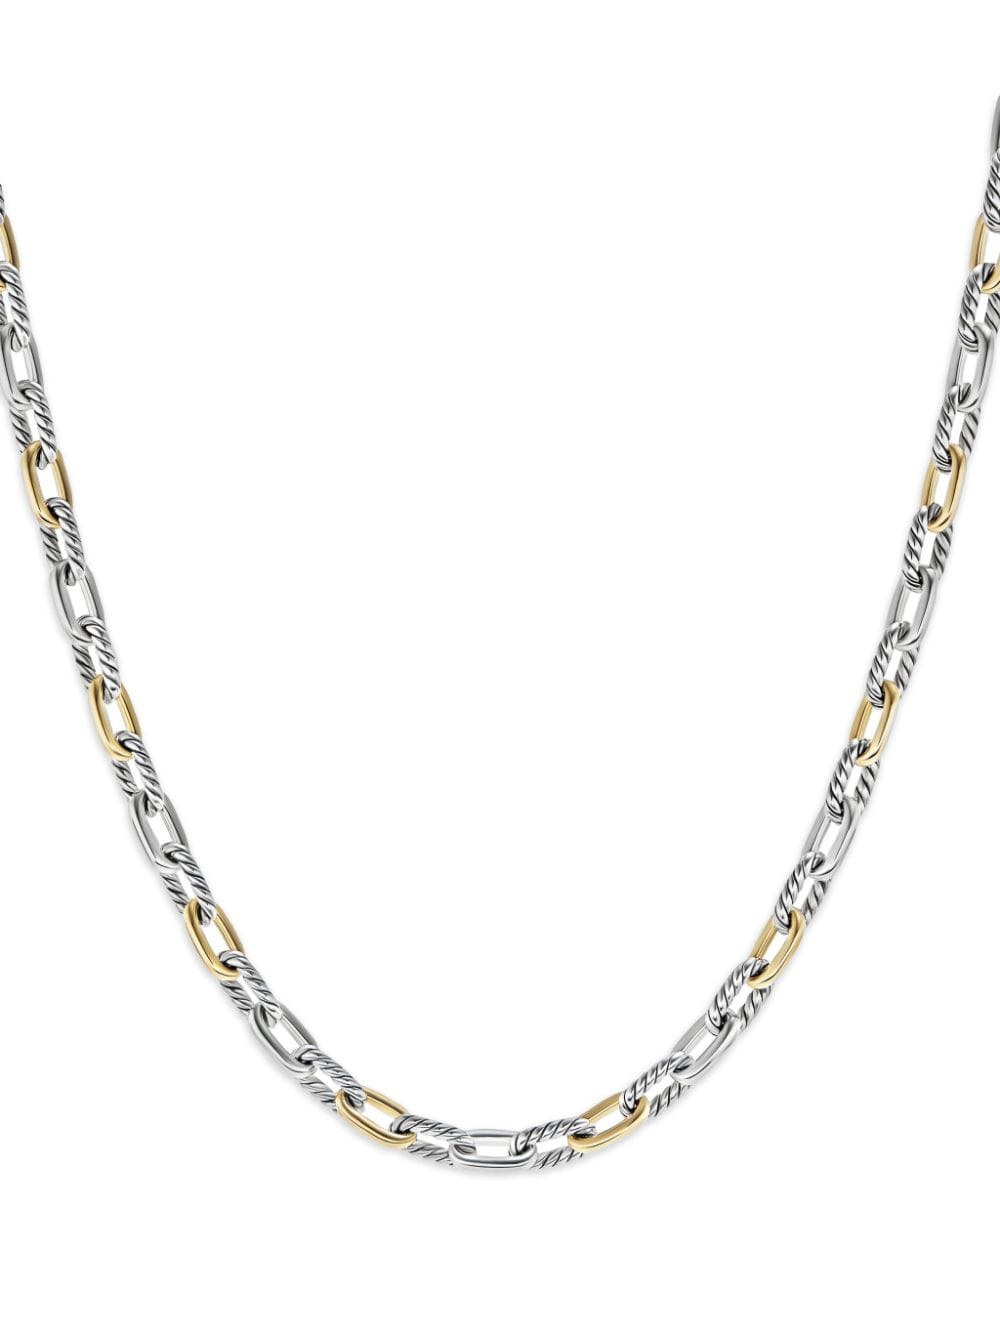 Shop David Yurman 18kt Yellow Gold And Silver Madison 5.5mm Chain Necklace